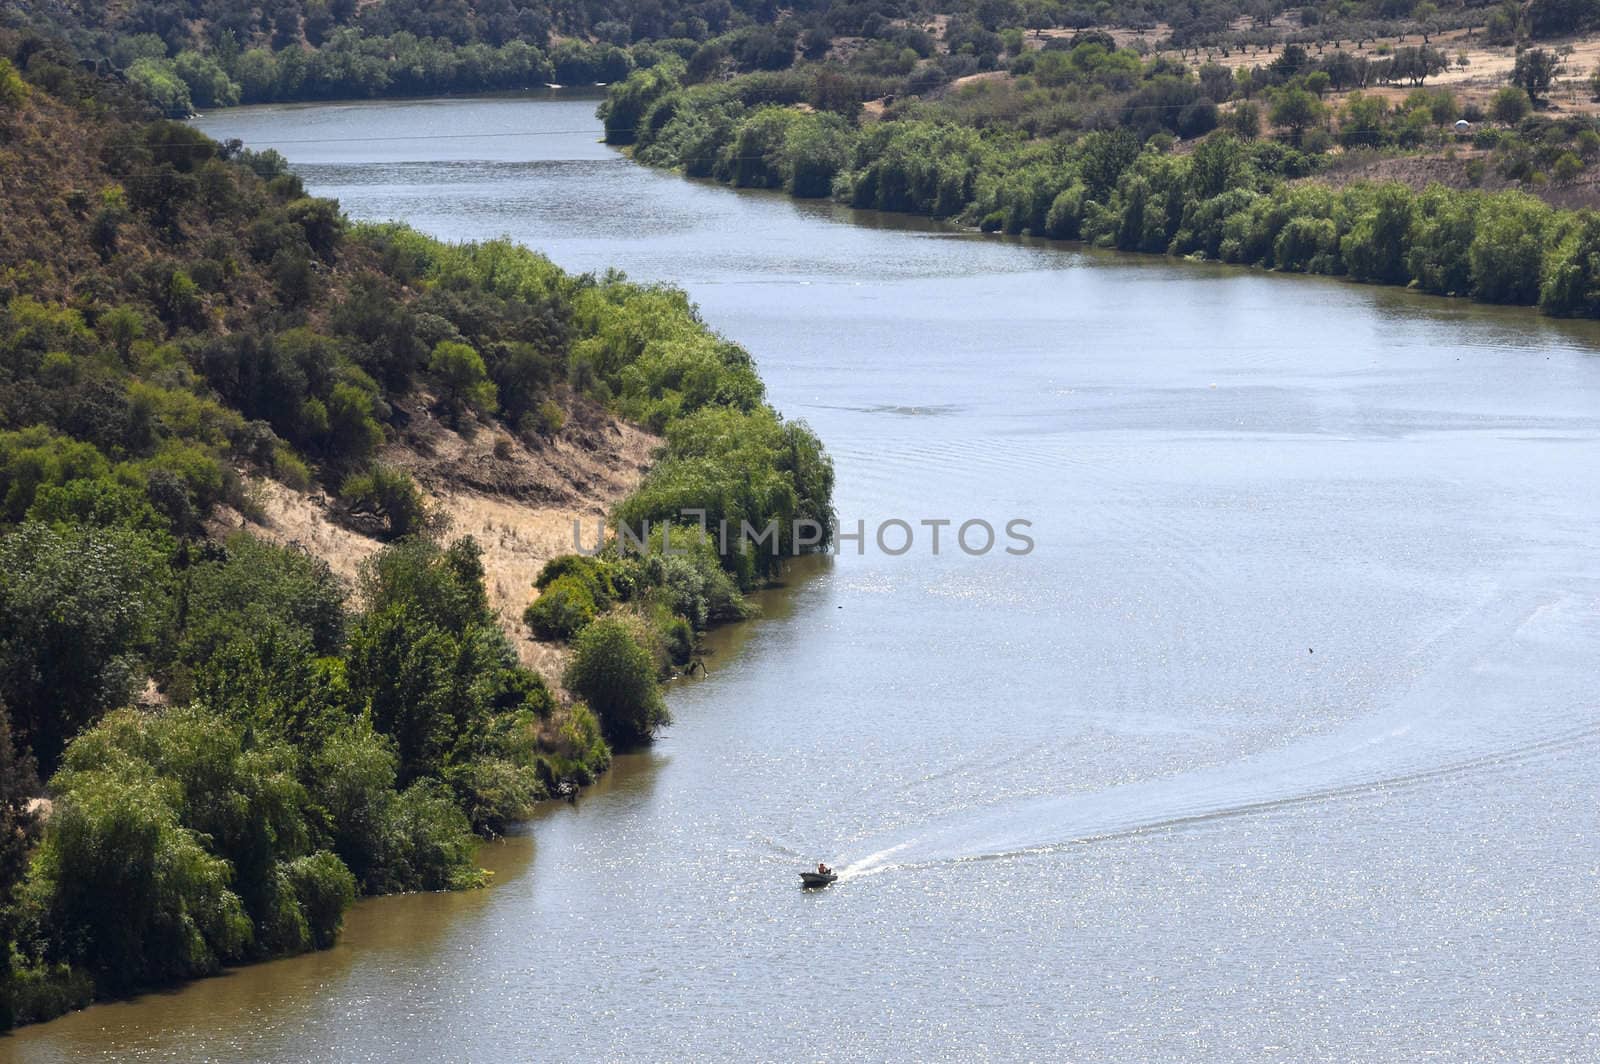 Meandering stretch of the river Guadiana, Portugal